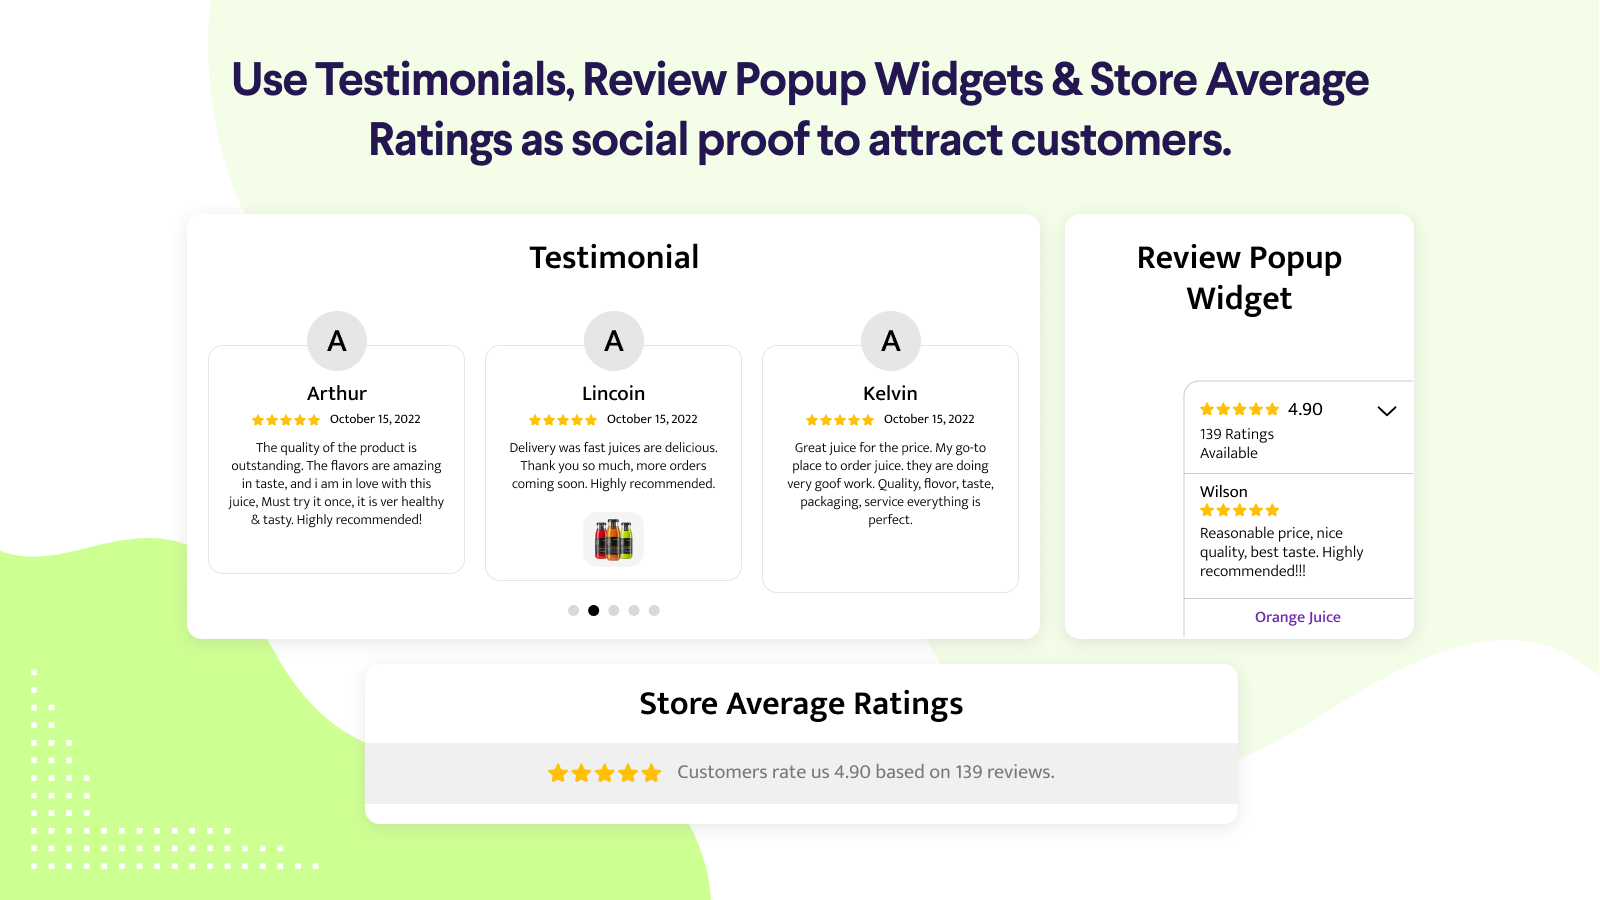 Use testimonials, popup widgets & store ratings as social proof.